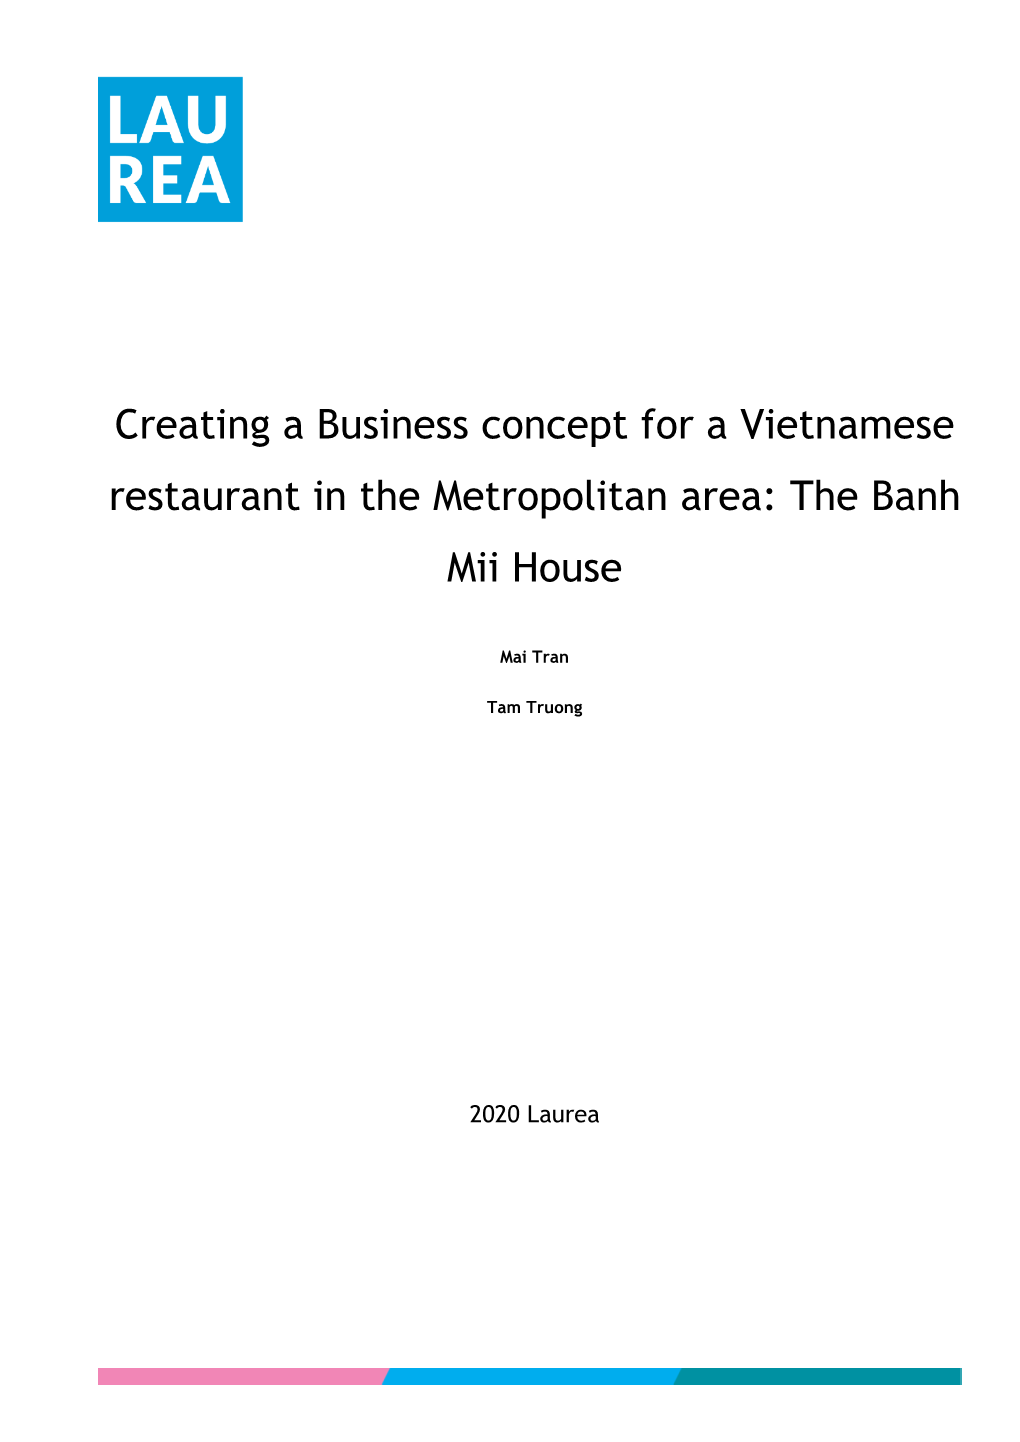 Creating a Business Concept for a Vietnamese Restaurant in the Metropolitan Area: the Banh Mii House